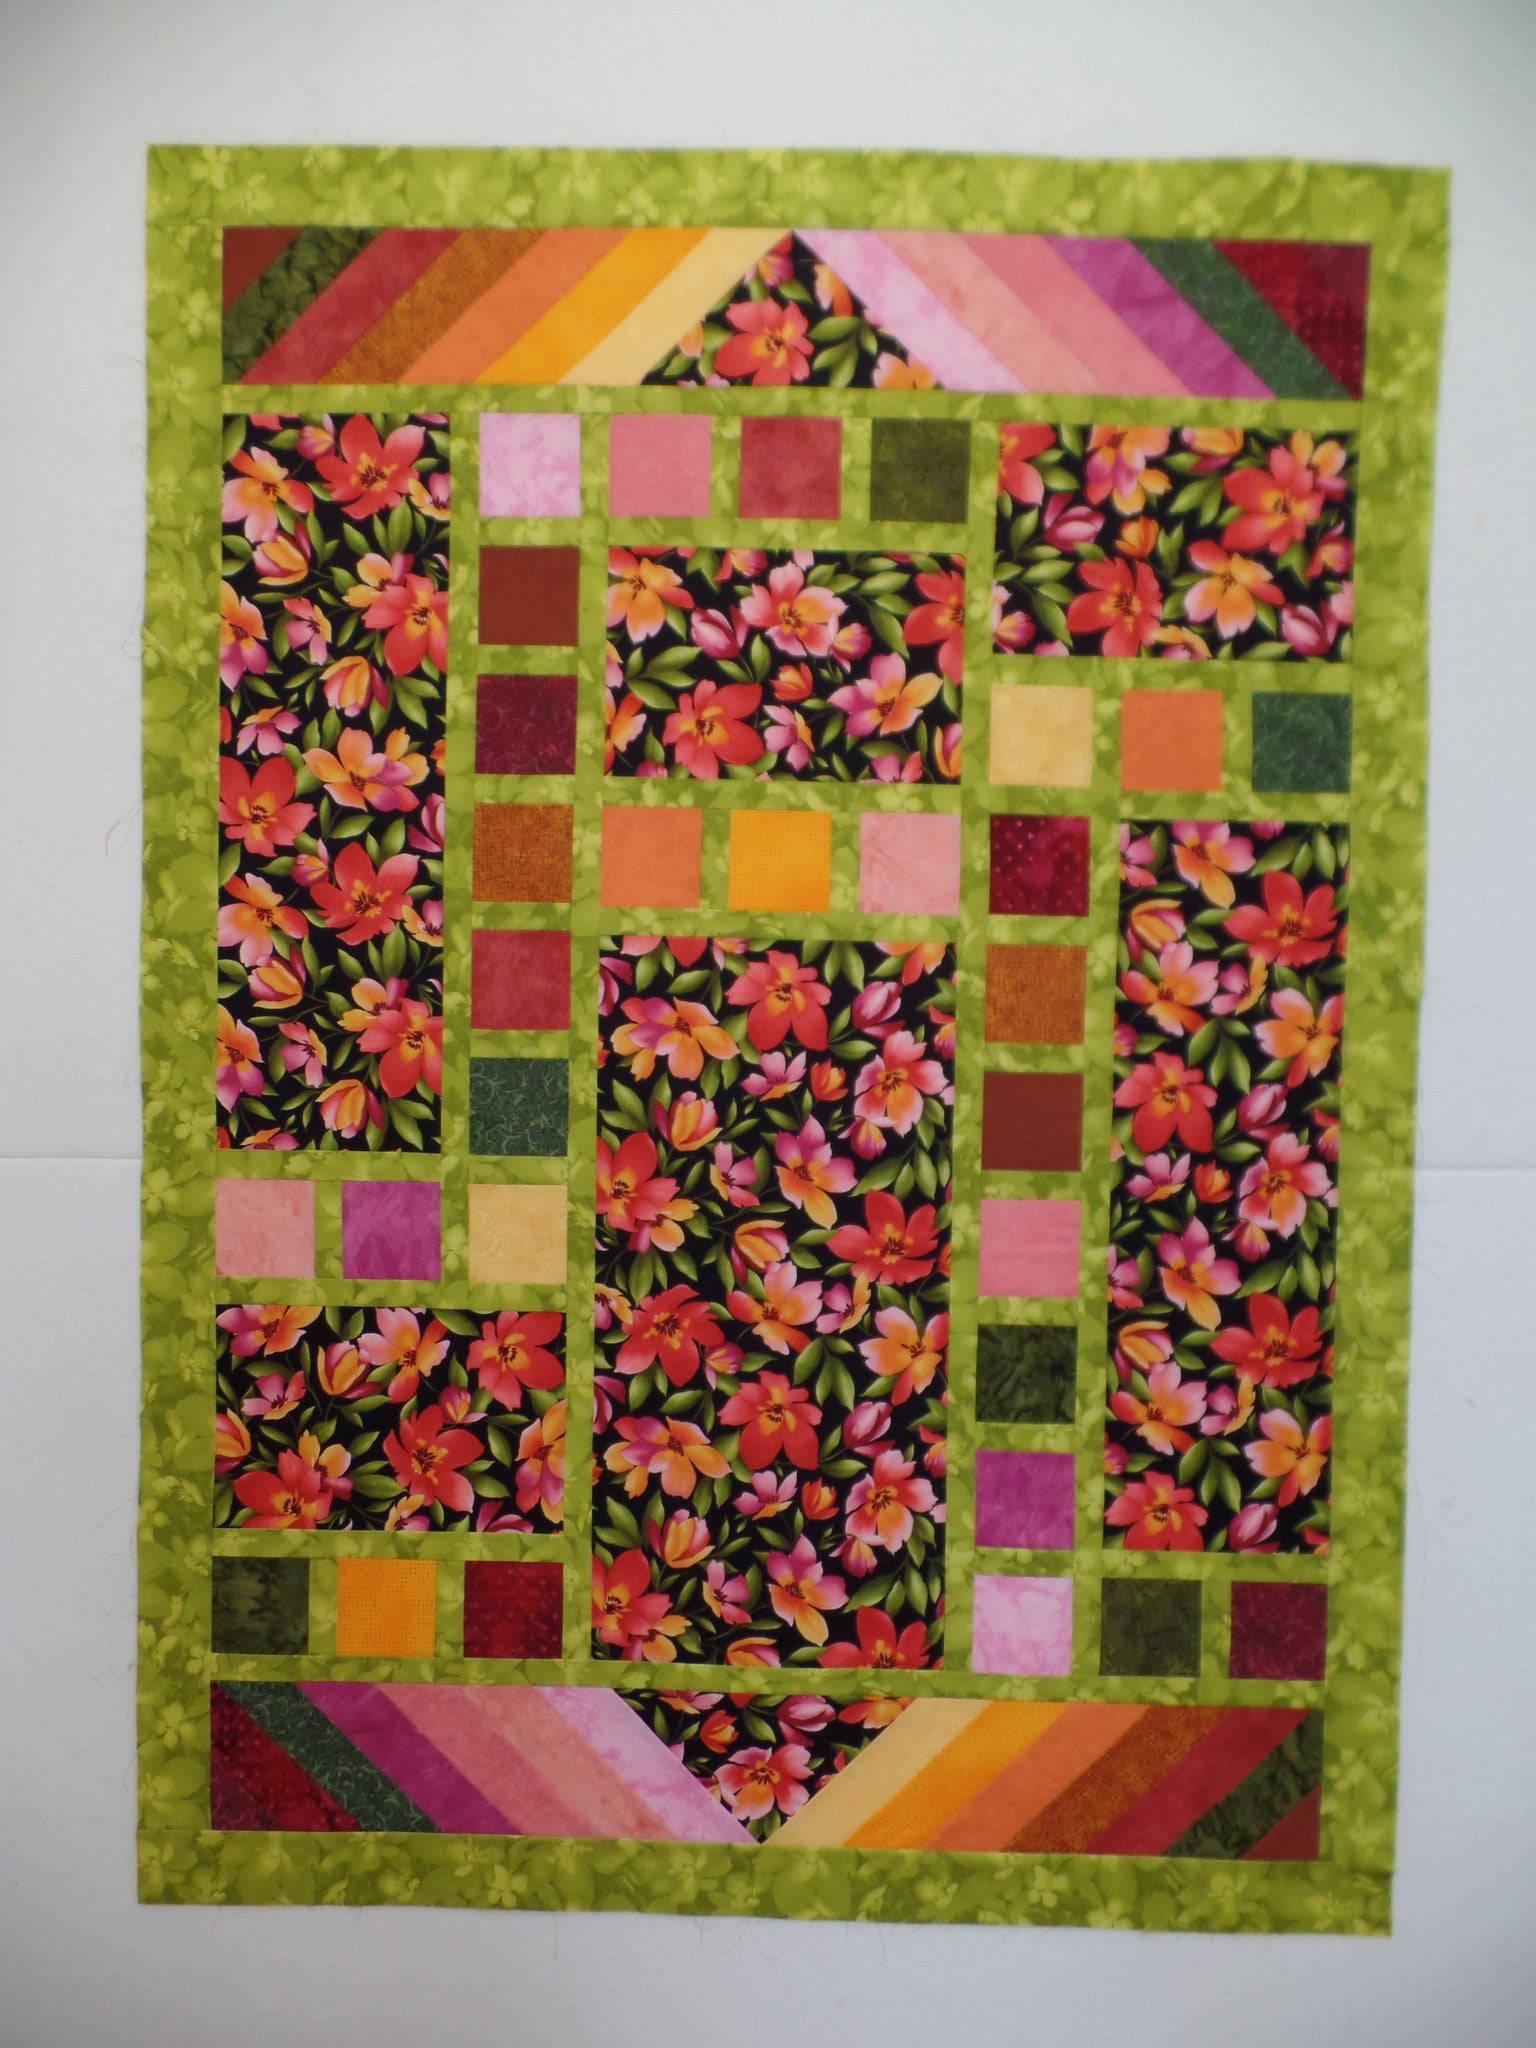 How to Make an Easy Quilt Block with Squares - Create with Claudia